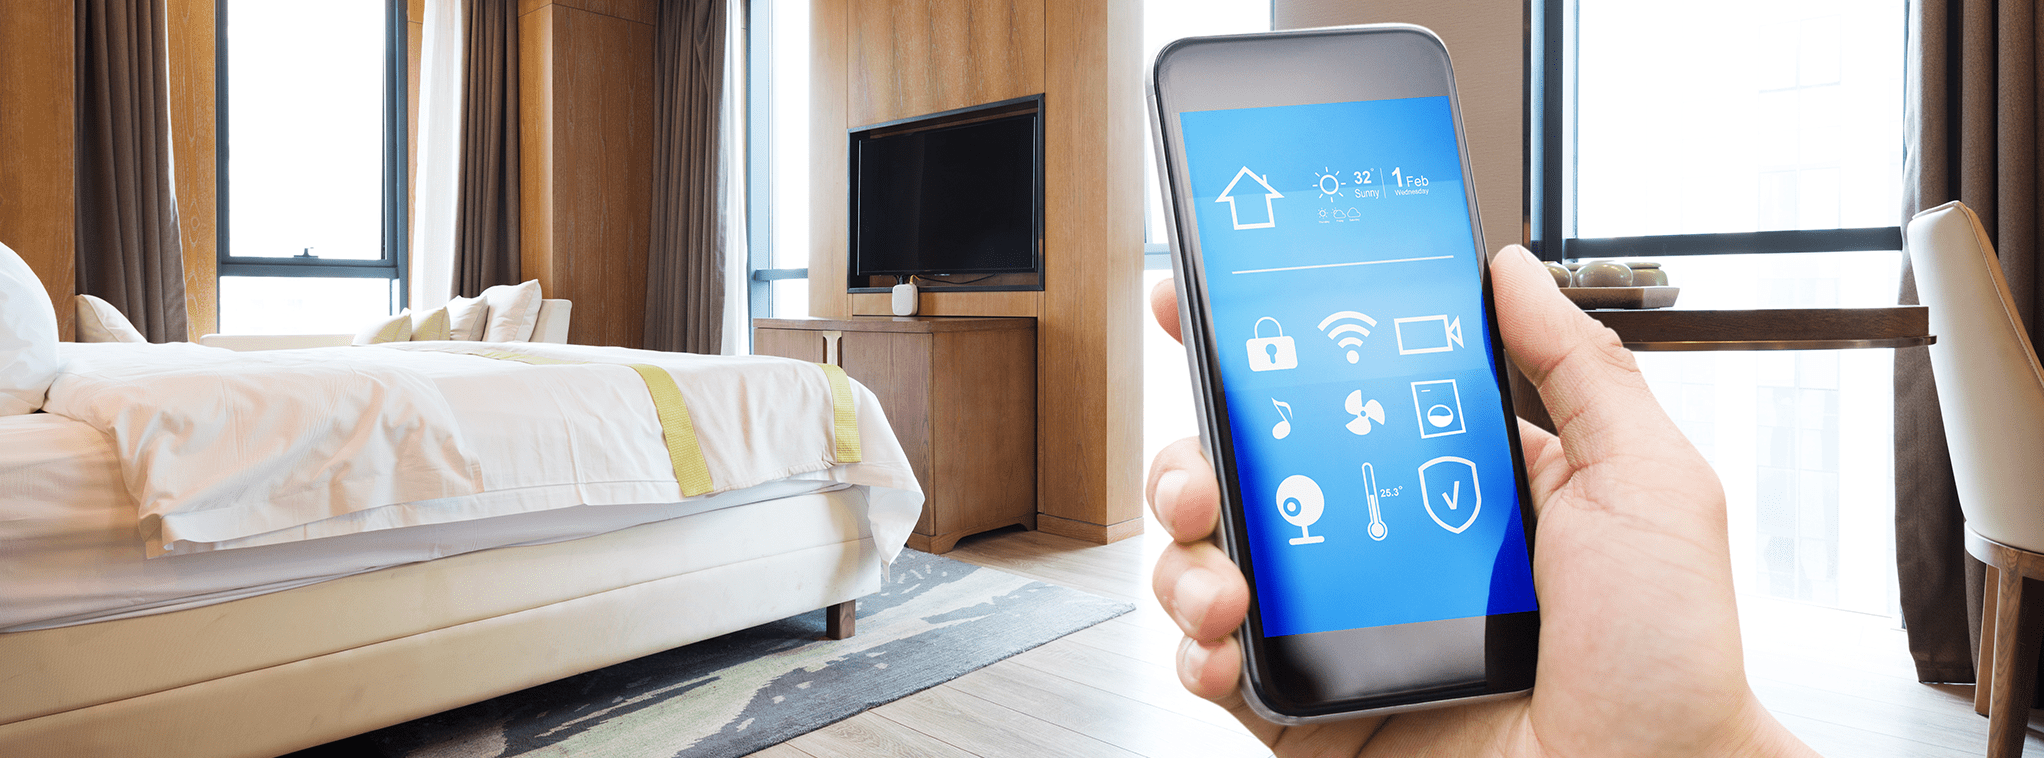 Technology Trends That Will Change the Hotel Industry